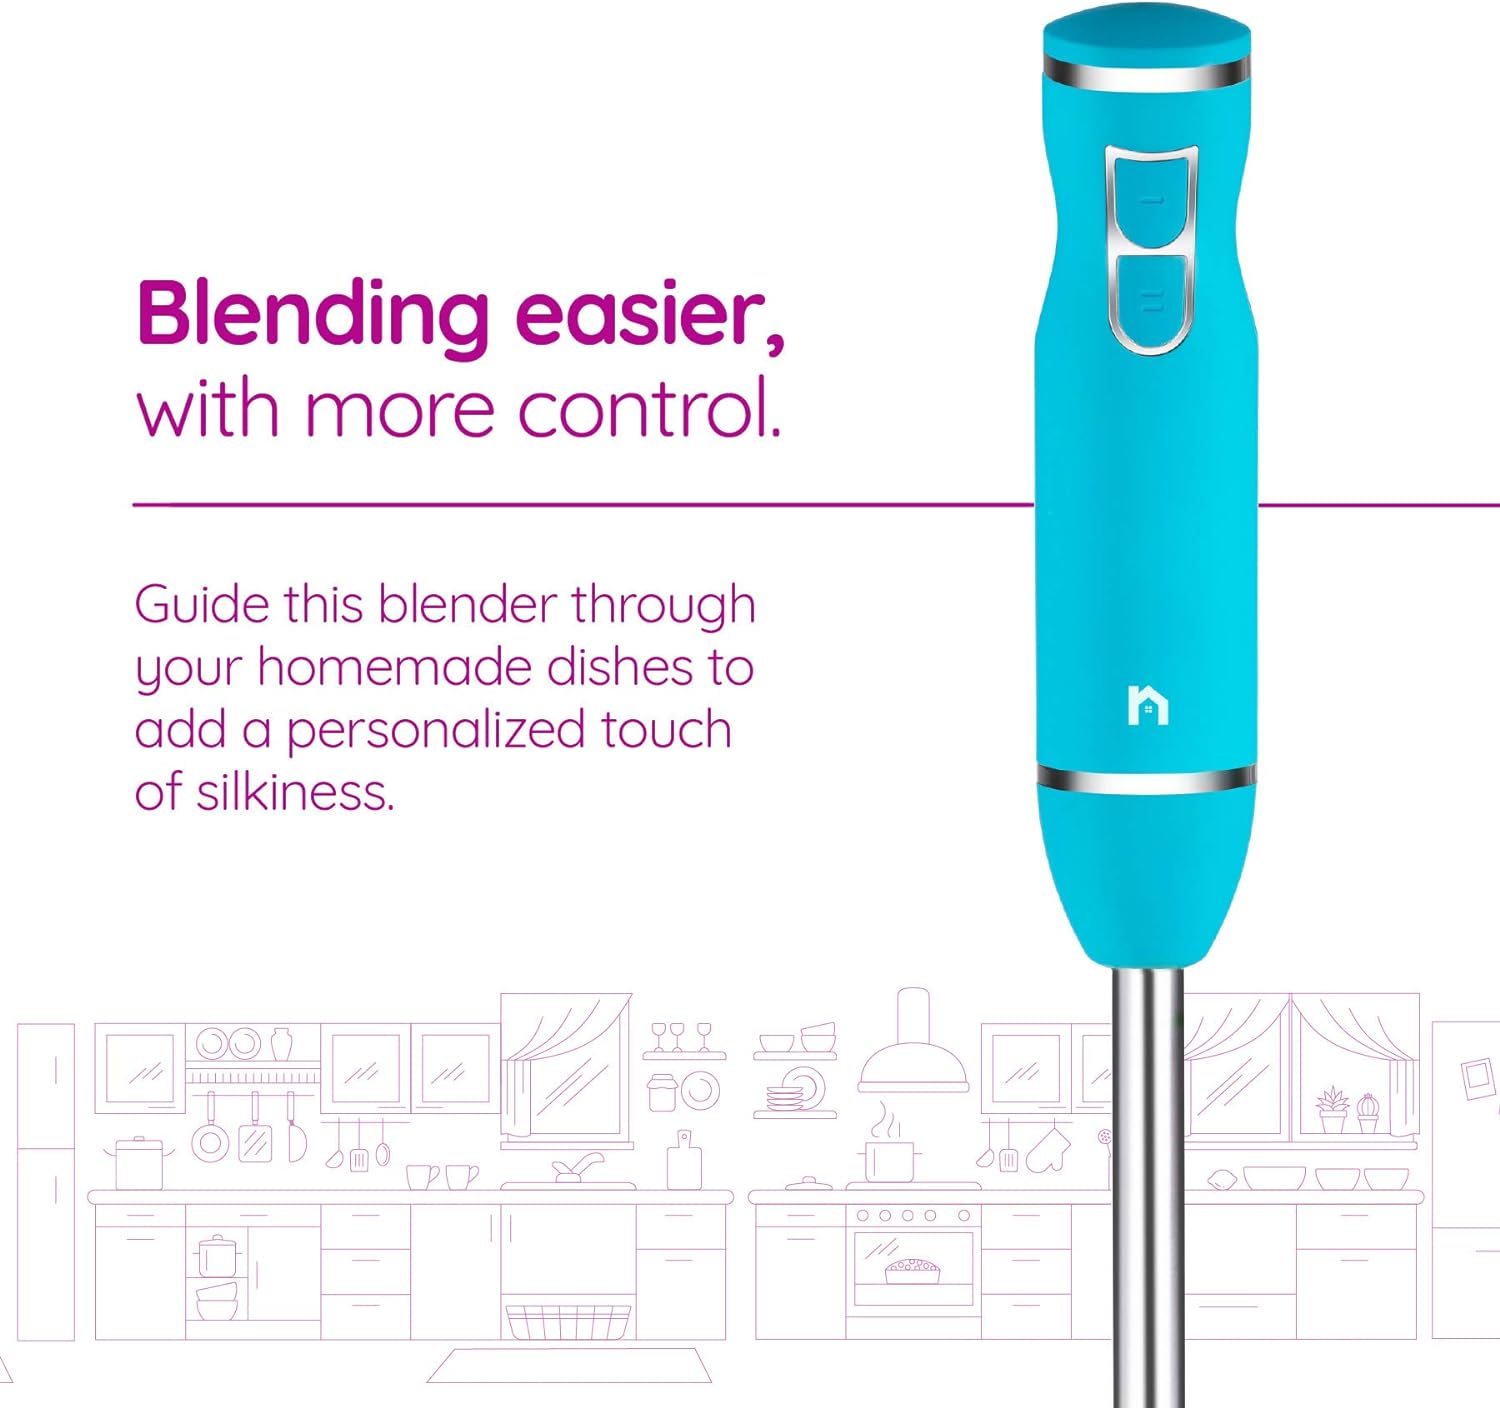 New House Kitchen Immersion Hand Blender 2 Speed Stick Mixer with Stainless Steel Shaft Blade, 300 Watts Easily Food, Mixes Sauces, Purees Soups, Smoothies, and Dips, Black